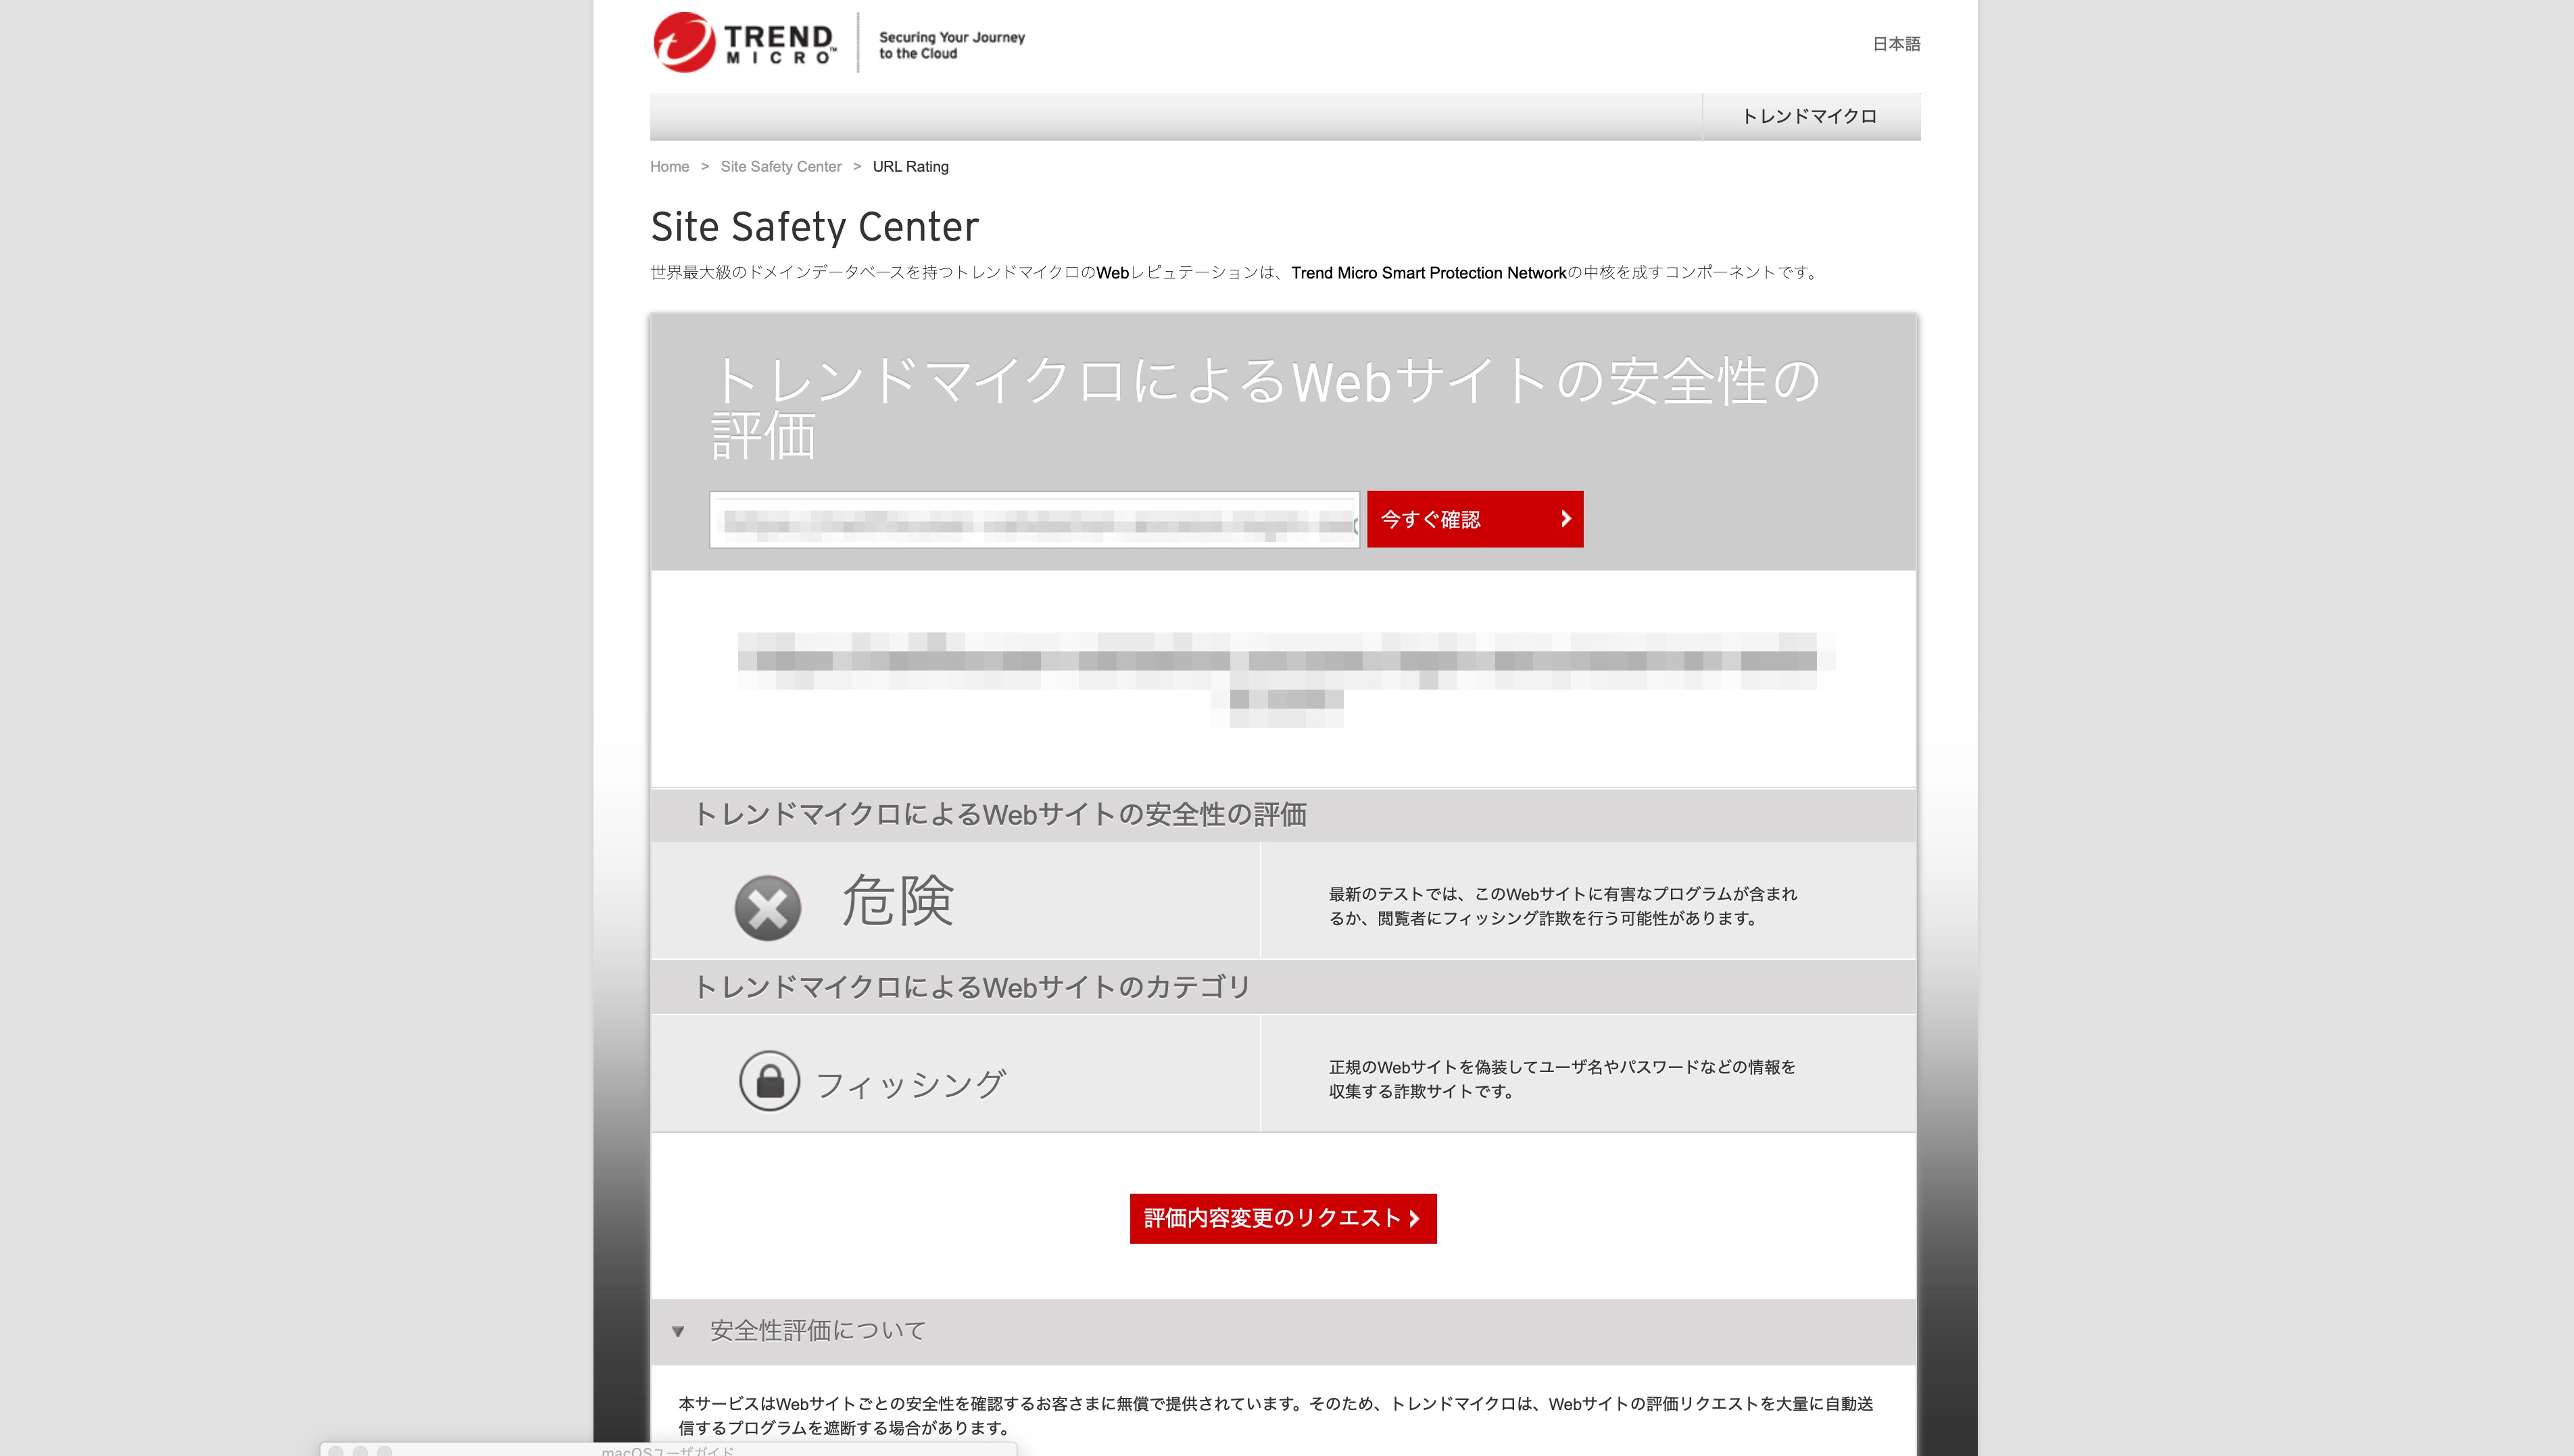 macOSユーザガイド_と_Trend_Micro_Site_Safety_Center